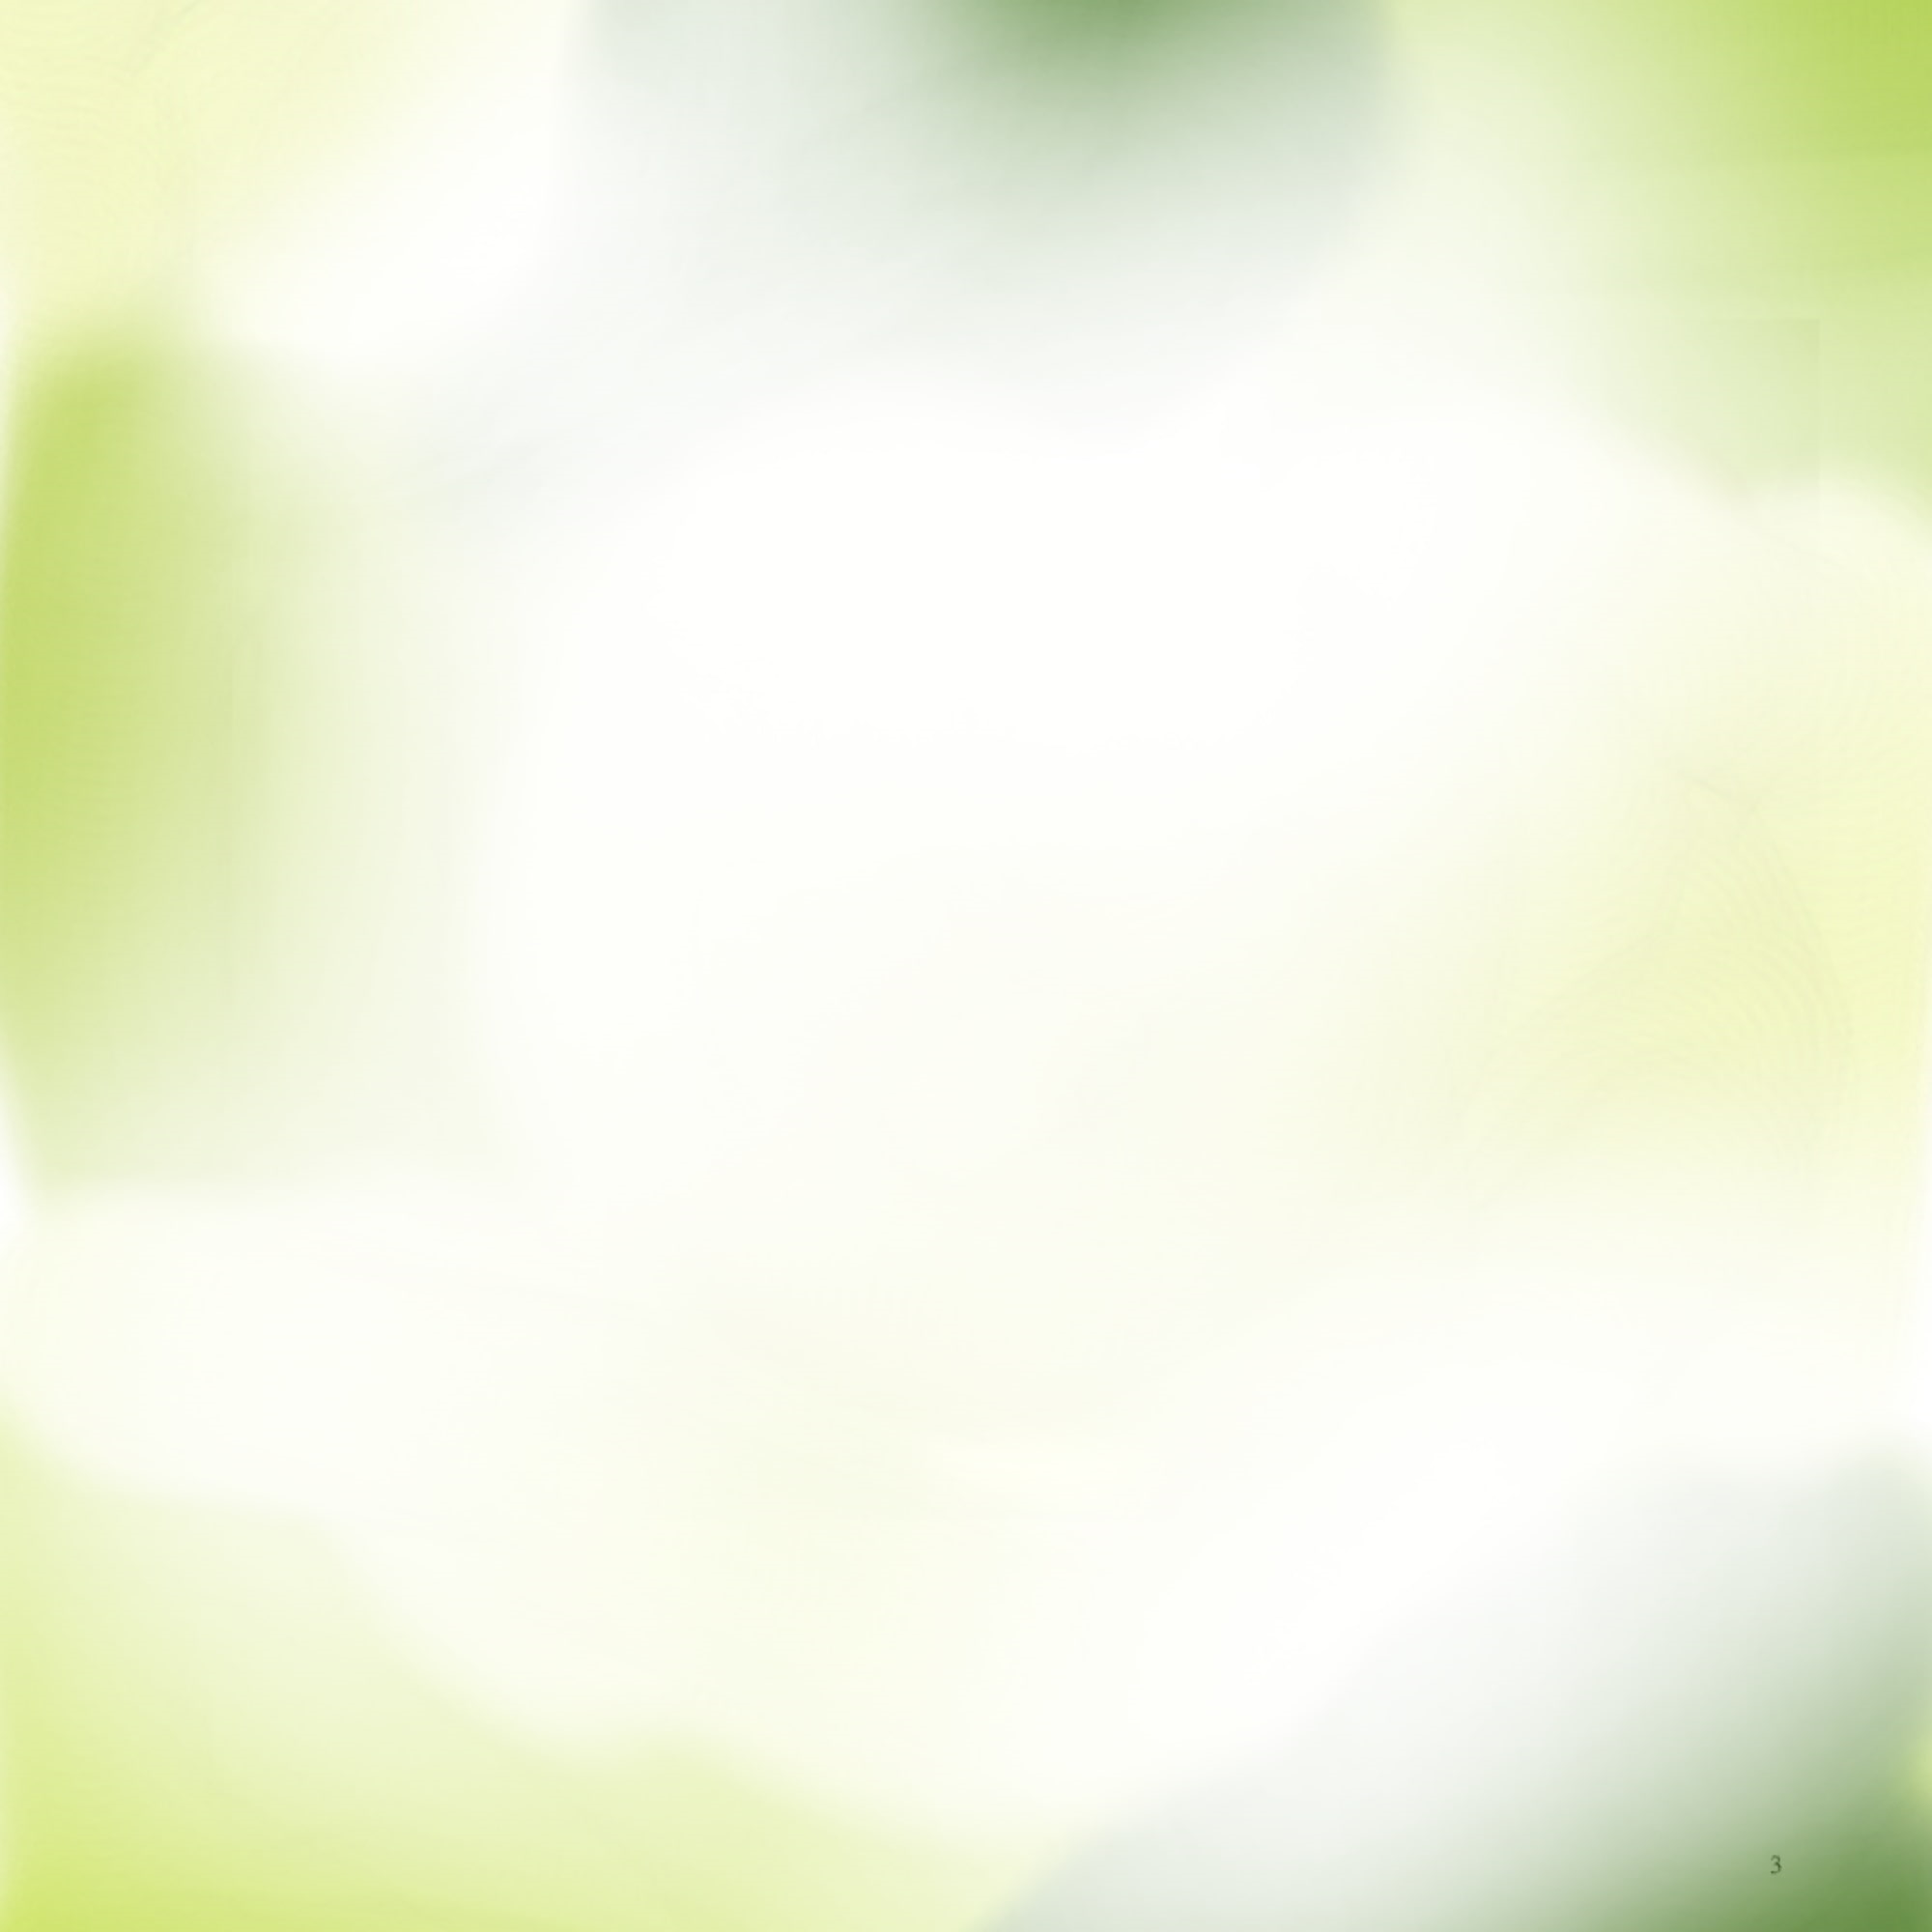 Blurry photo of a green and white background.